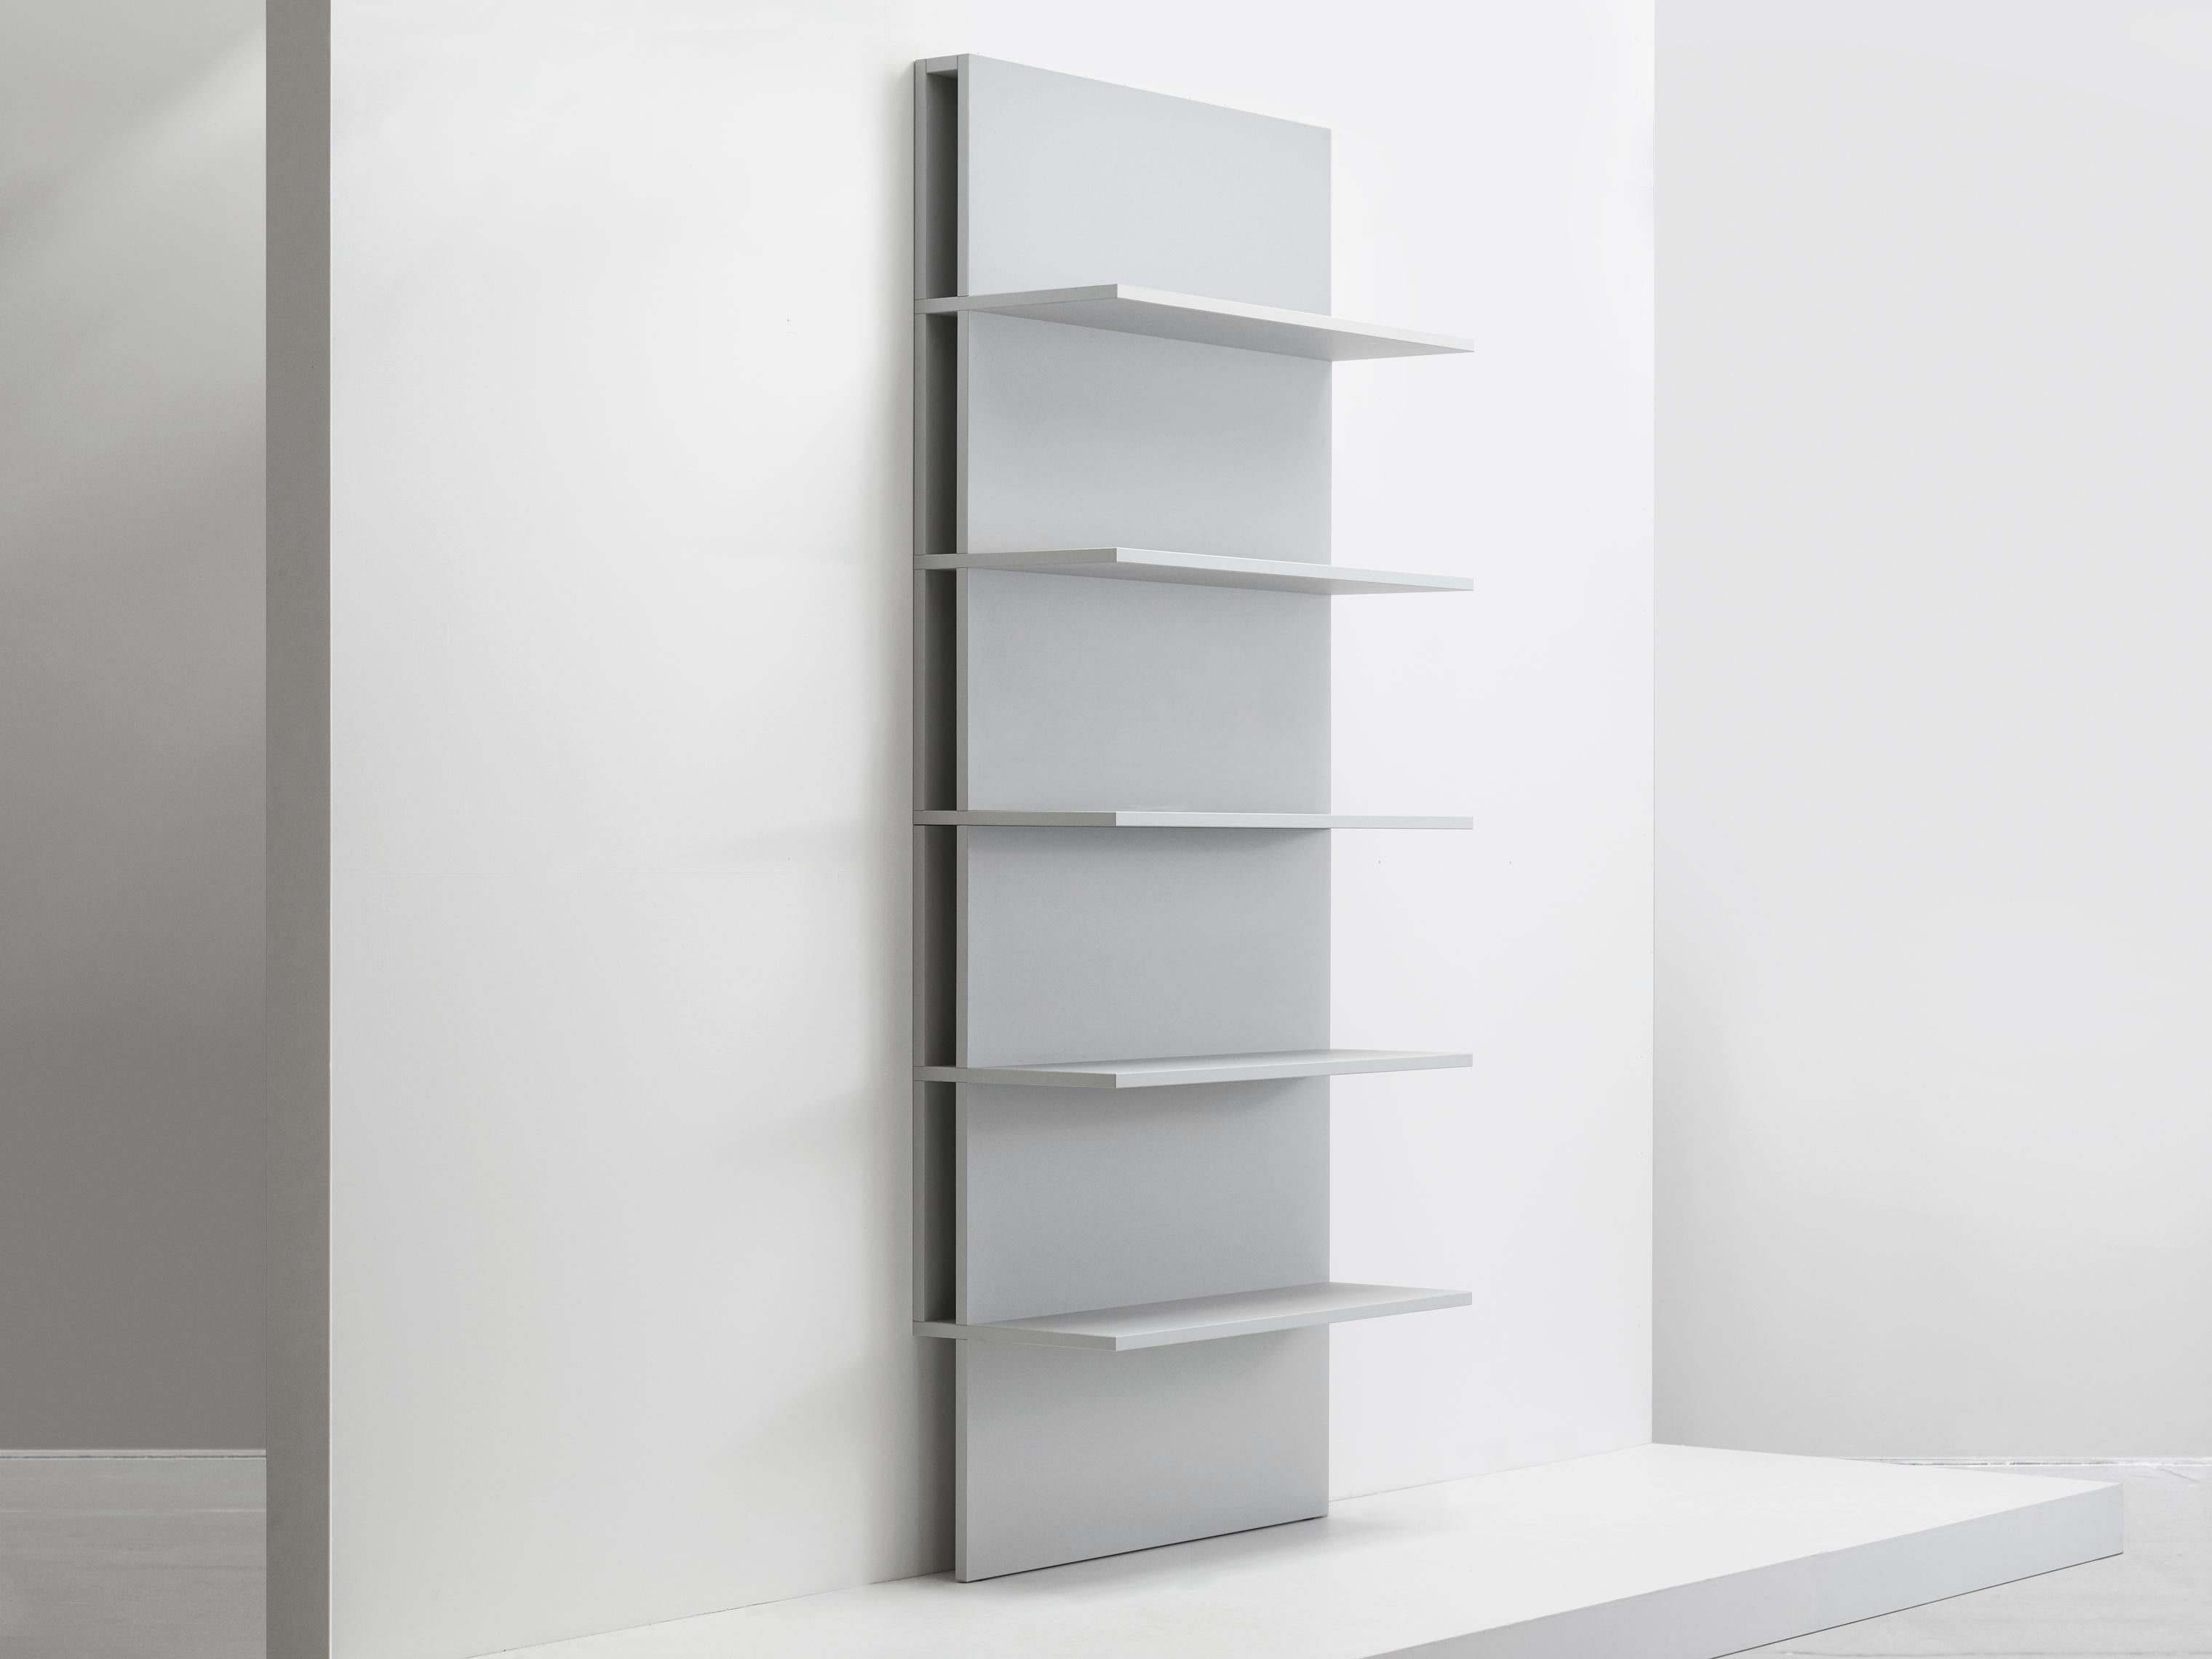 Other Kontra Shelves by SNICKERIET For Sale